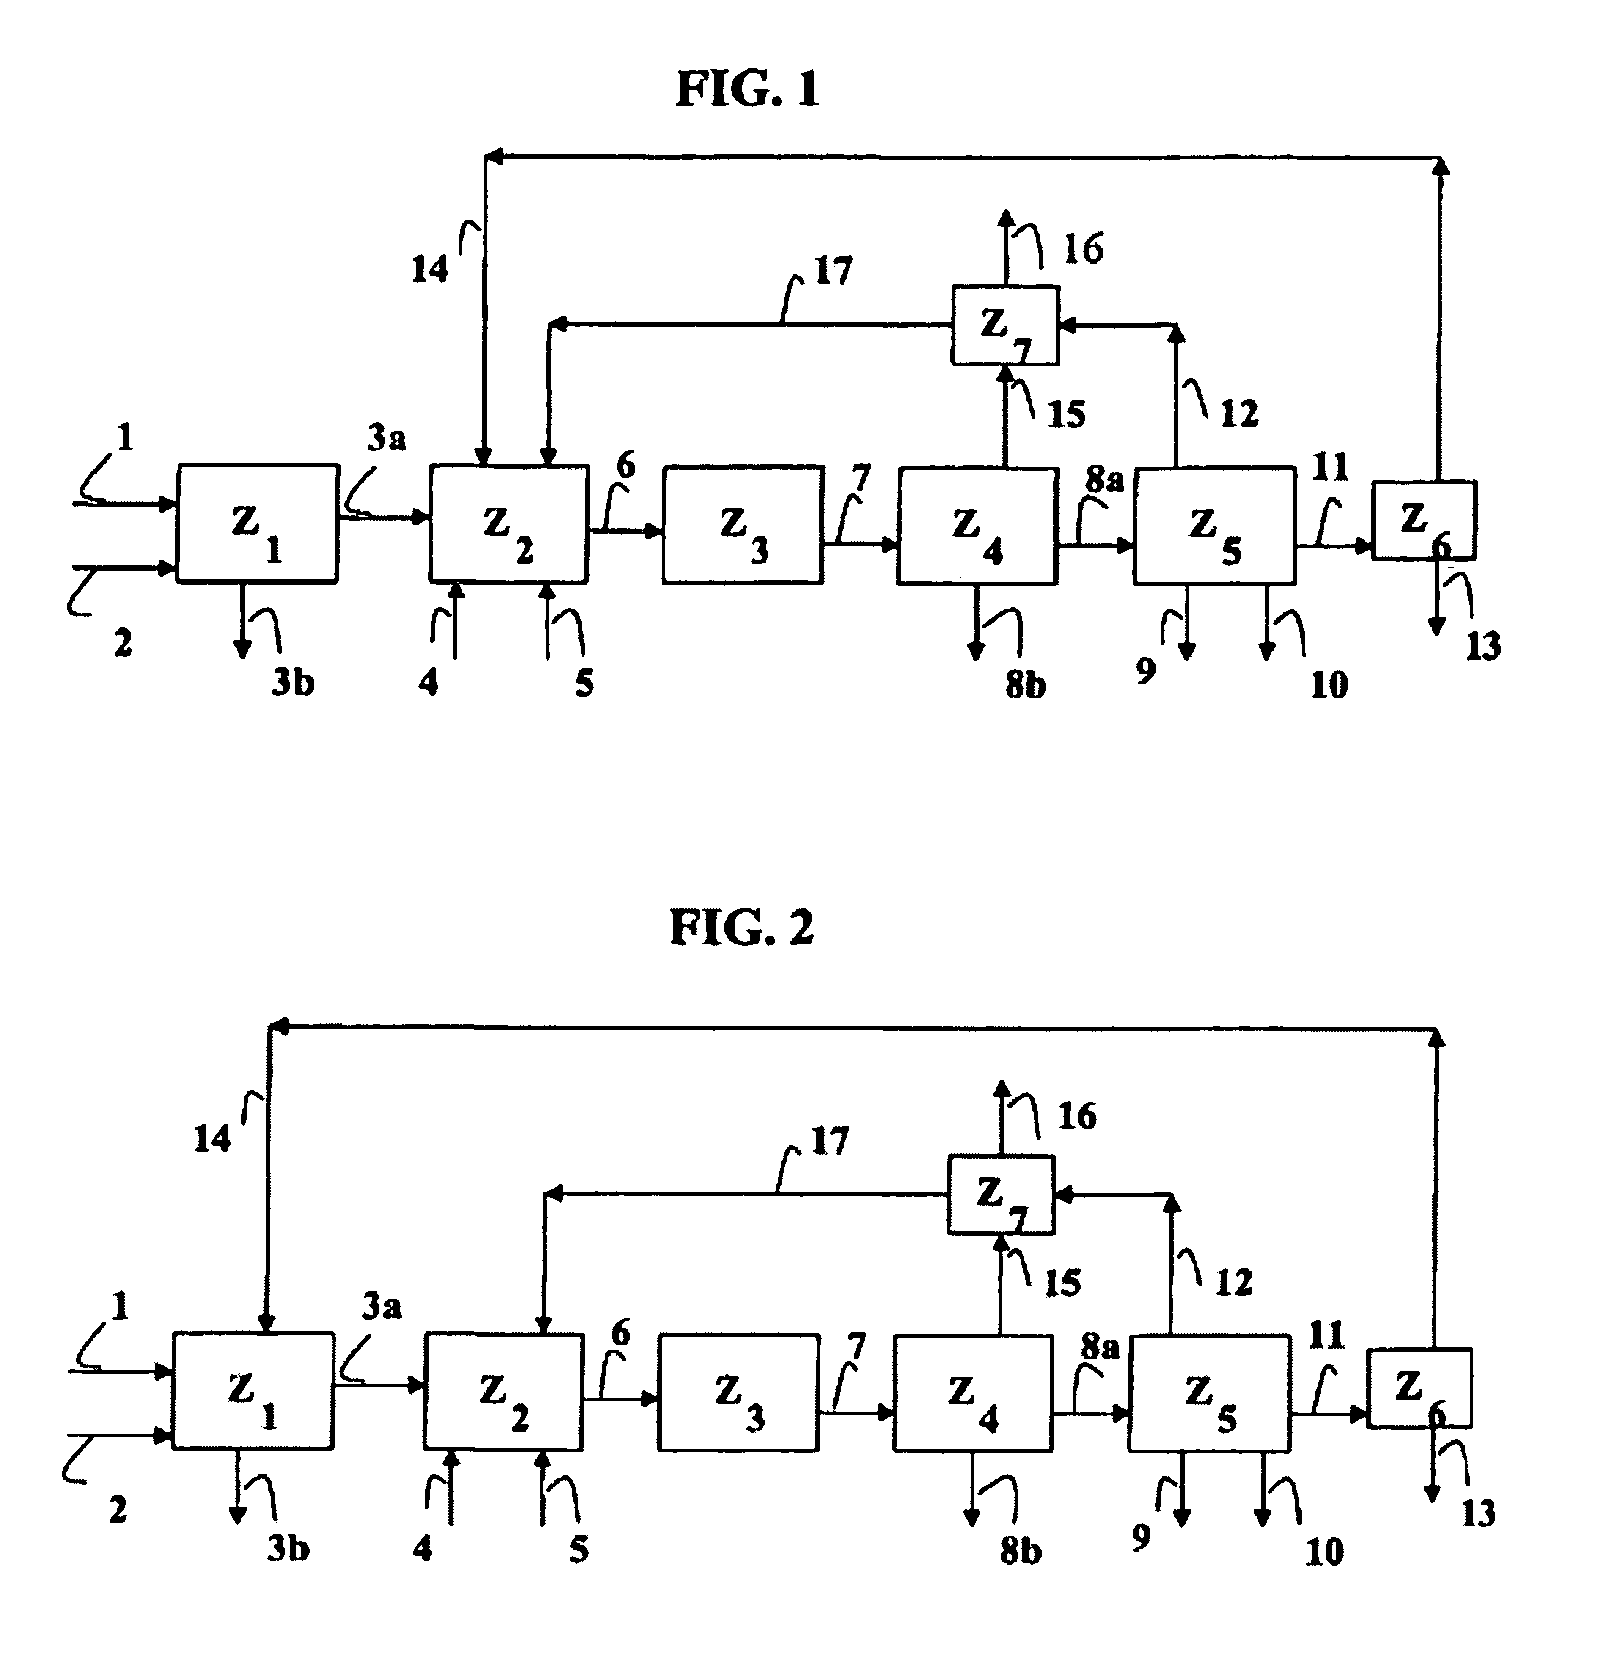 Production of liquid fuels by a concatenation of processes for treatment of a hydrocarbon feedstock